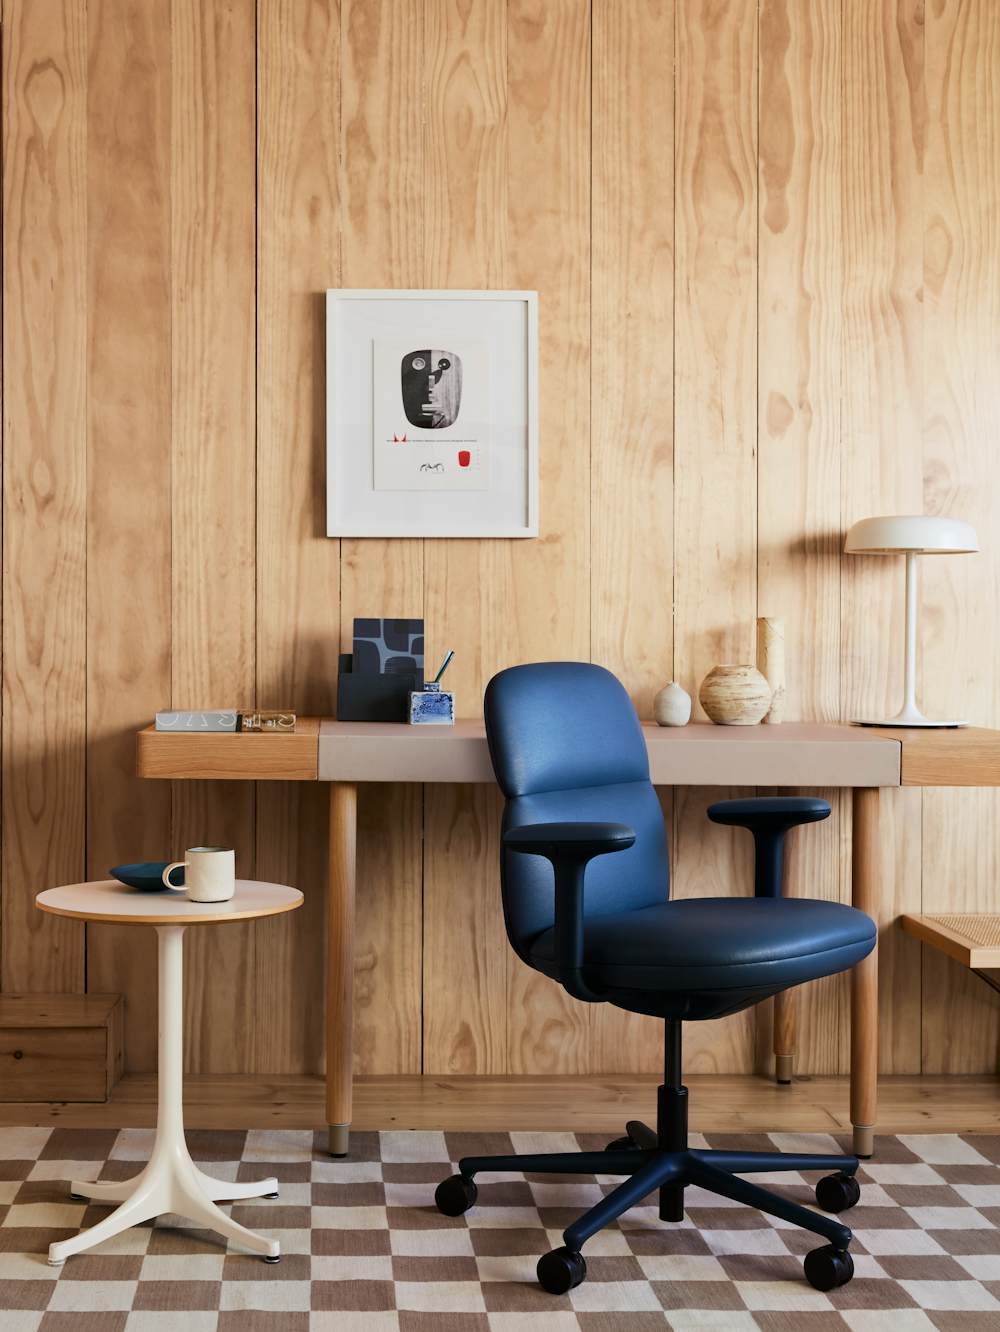 Eames Executive Chair at Leatherwrap Desk with Girard Plus rug